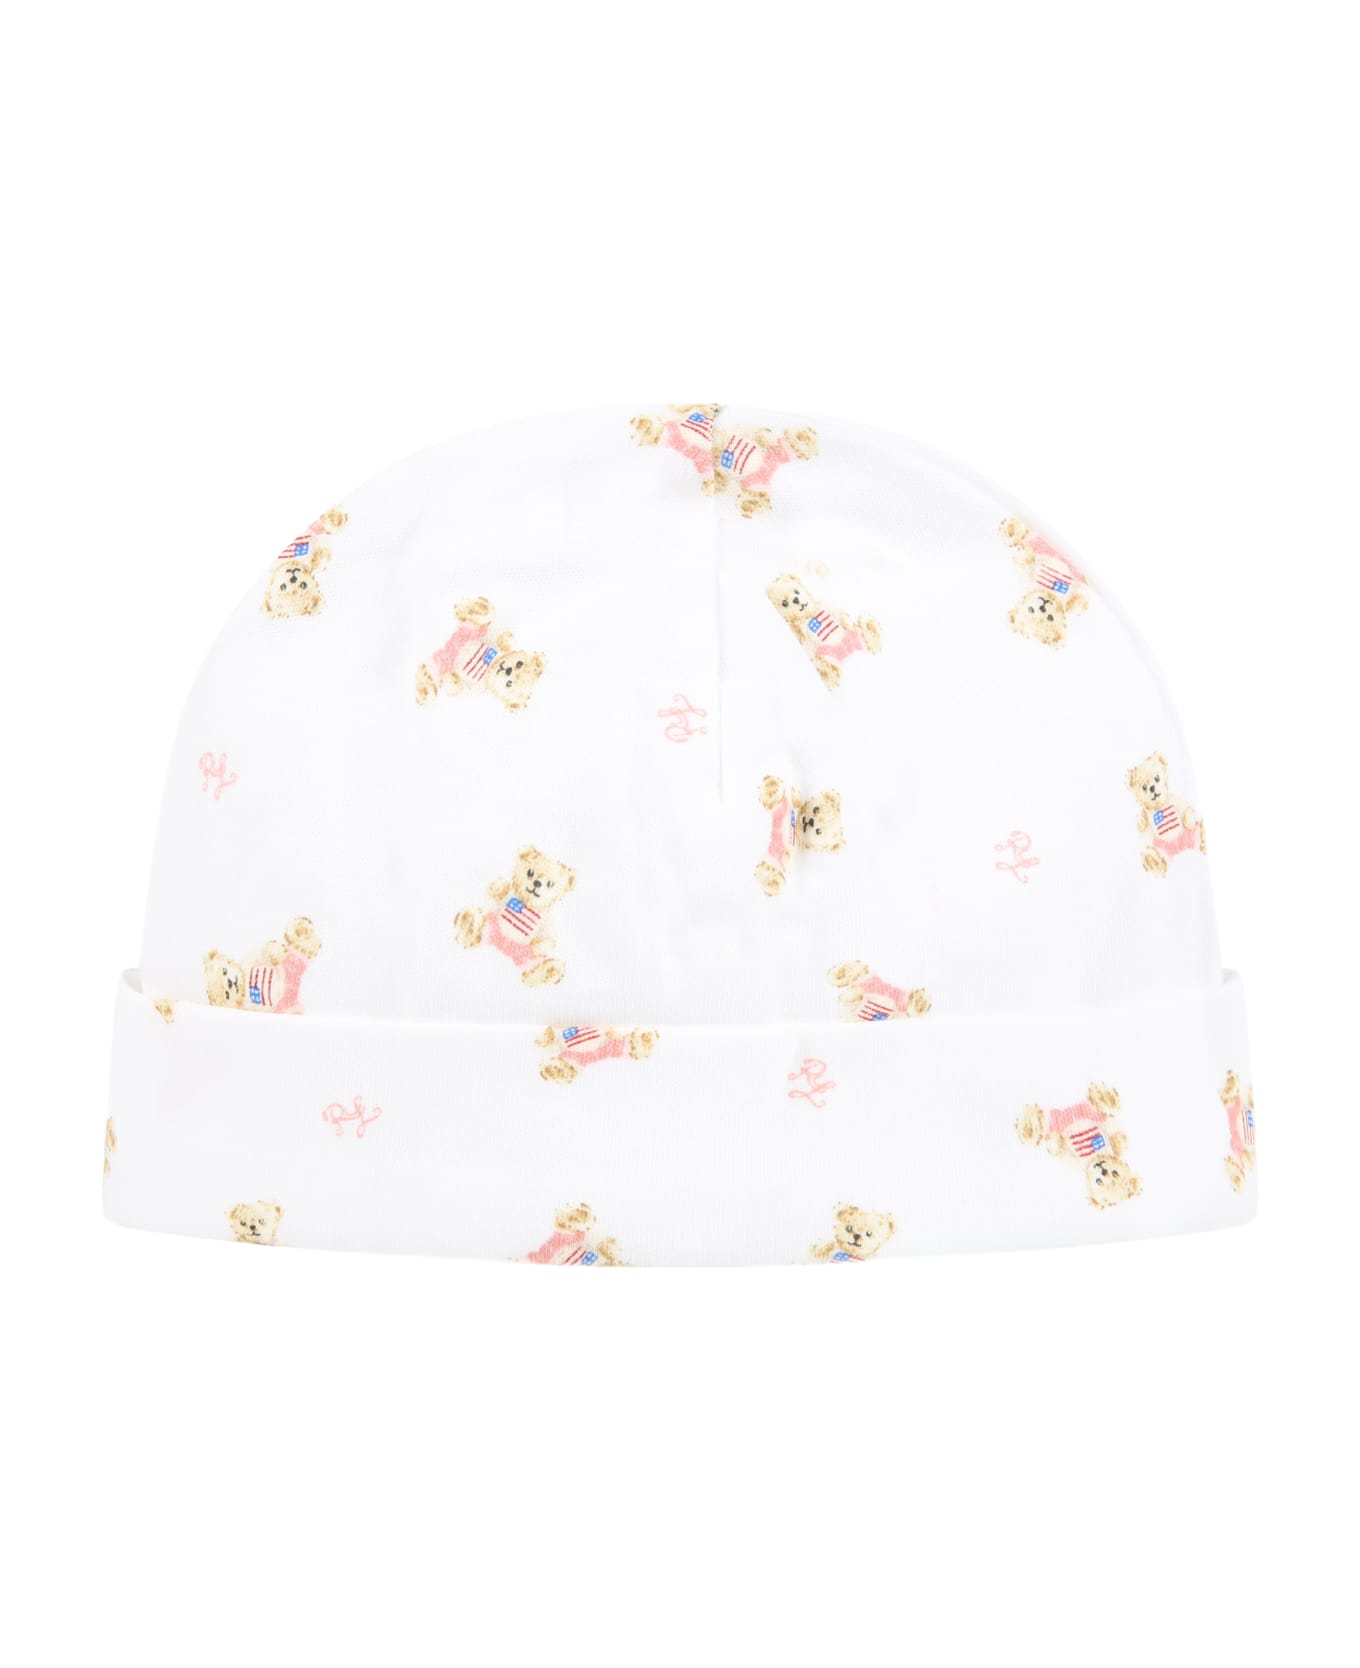 Ralph Lauren White Hat For Babygirl With Bears - White アクセサリー＆ギフト